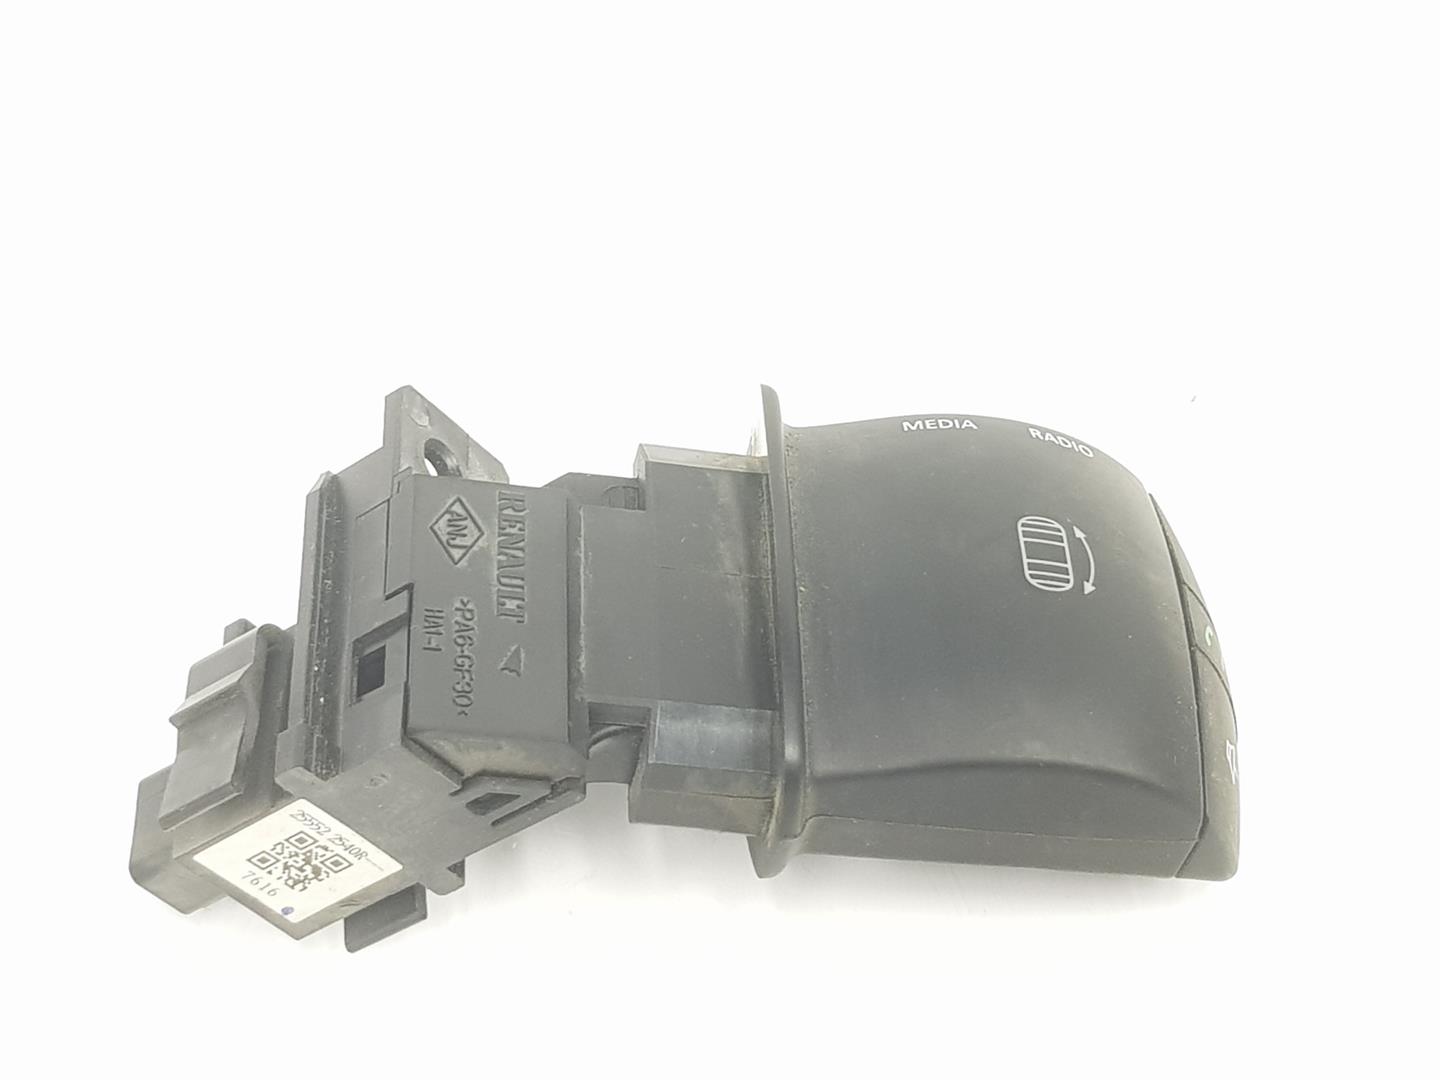 RENAULT Master 3 generation (2010-2023) Steering wheel buttons / switches 255522540R, 255529492R 23751632